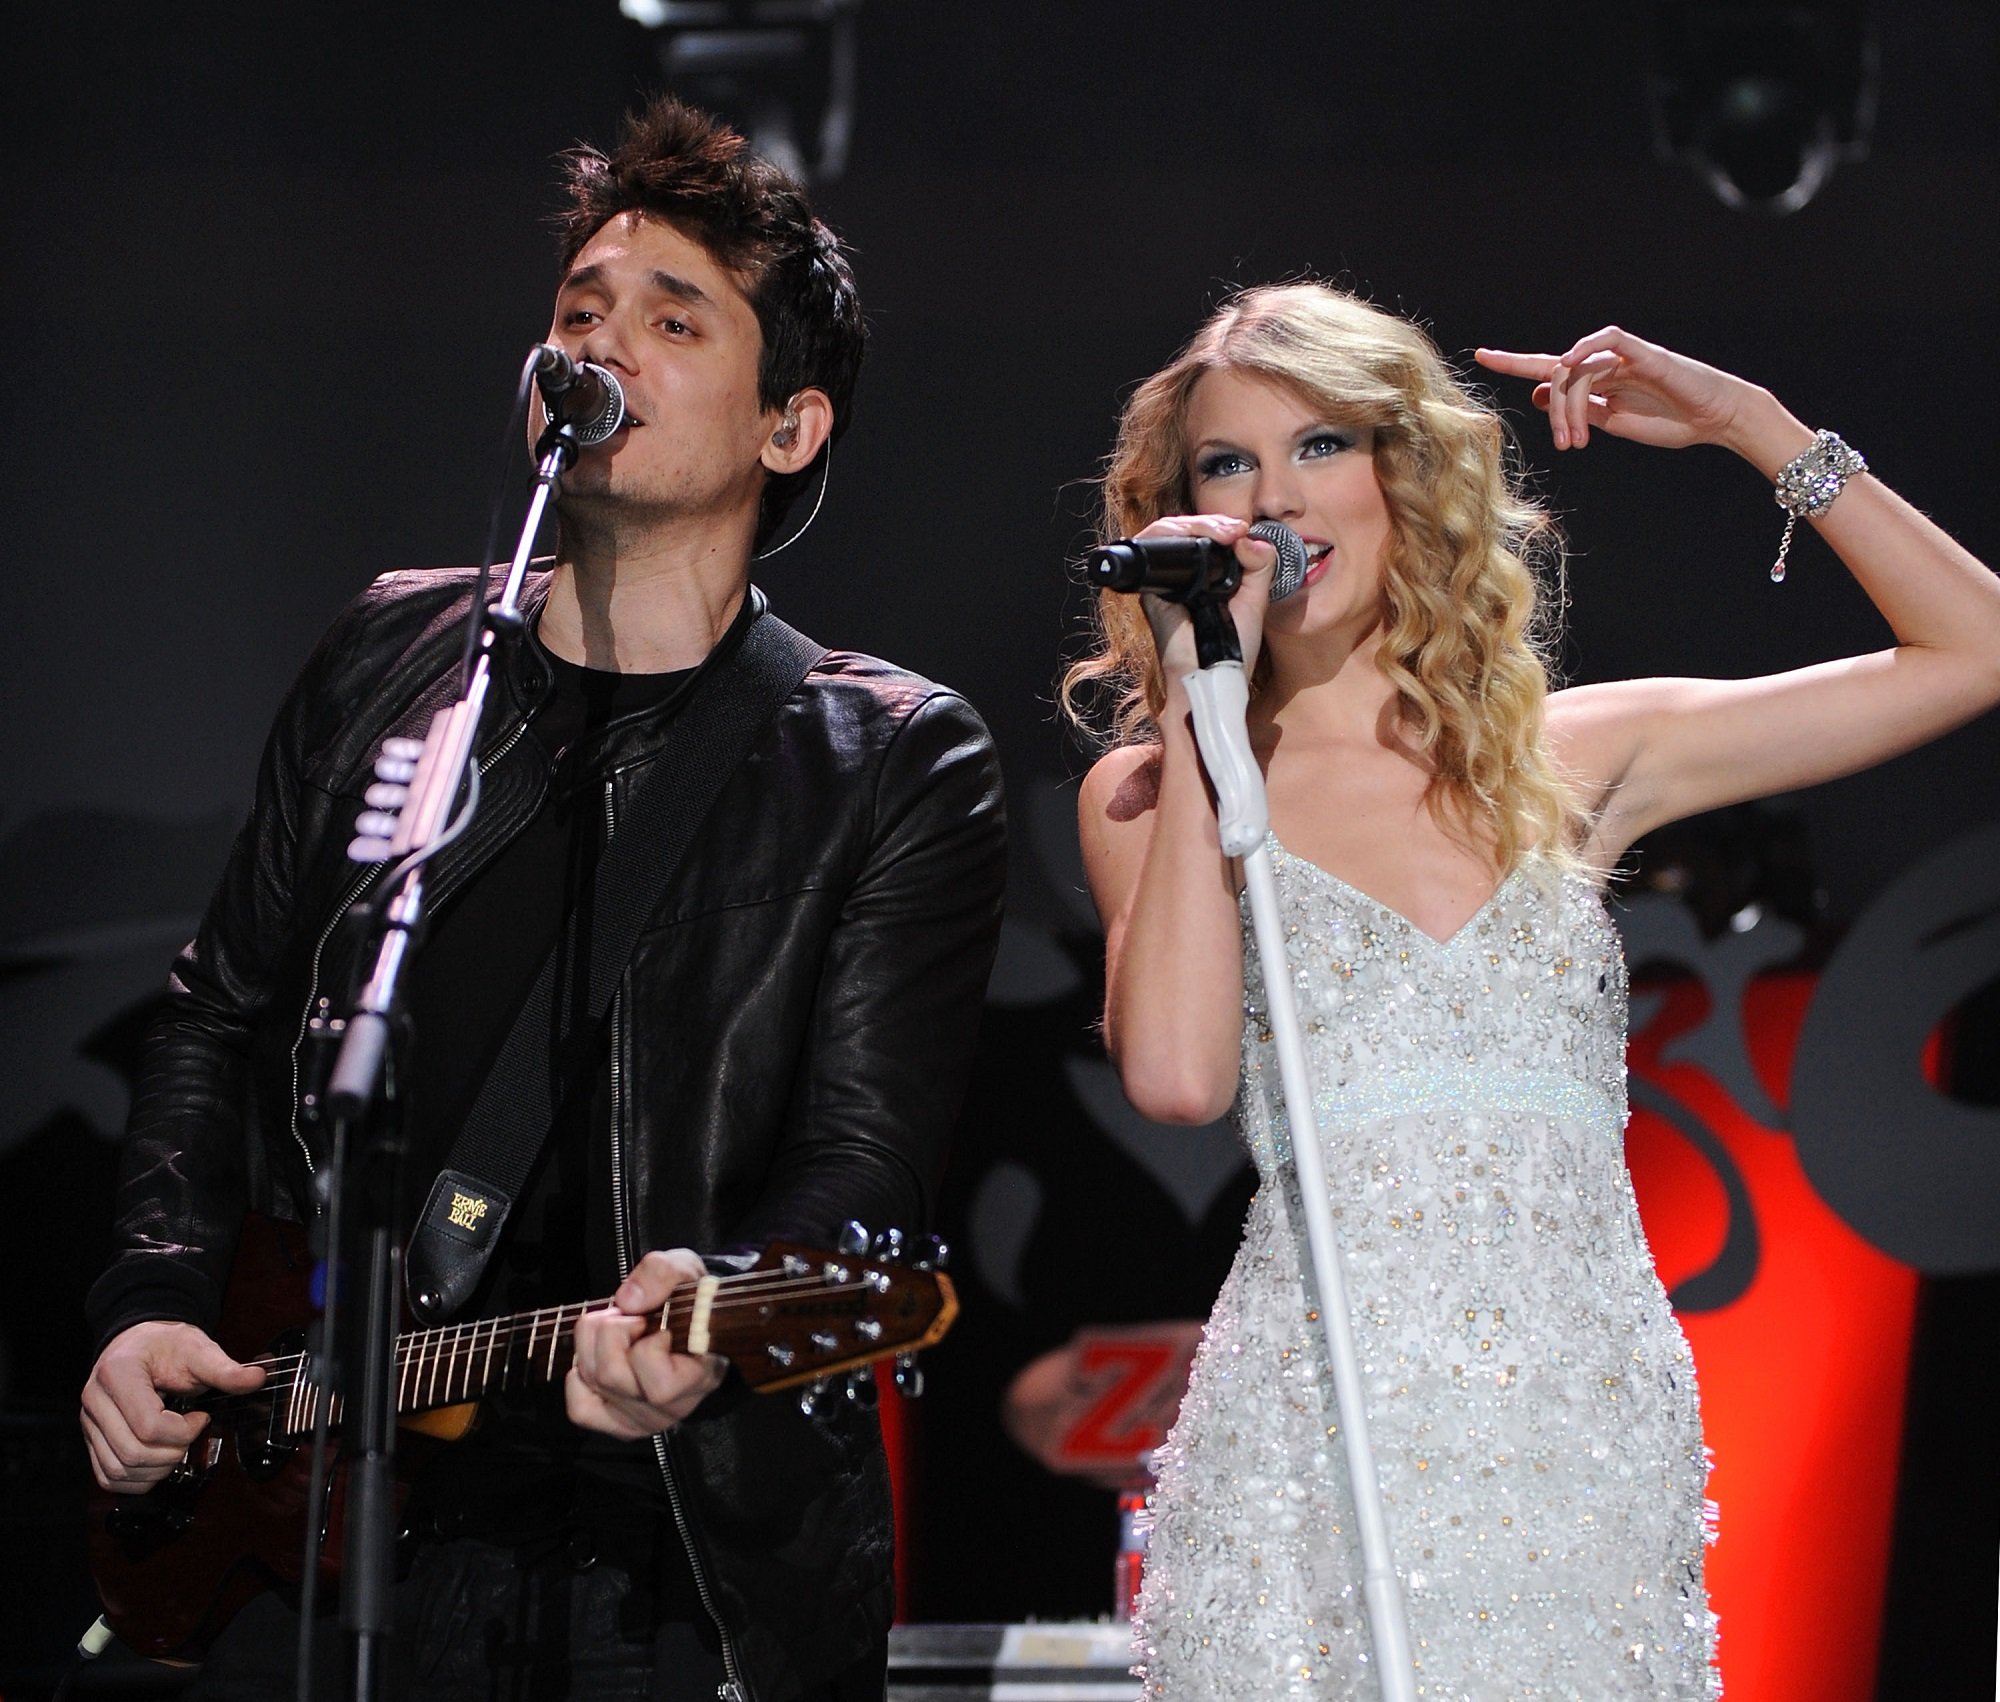 John Mayer and Taylor Swift perform onstage during Z100's Jingle Ball on December 11, 2009 in New York City.